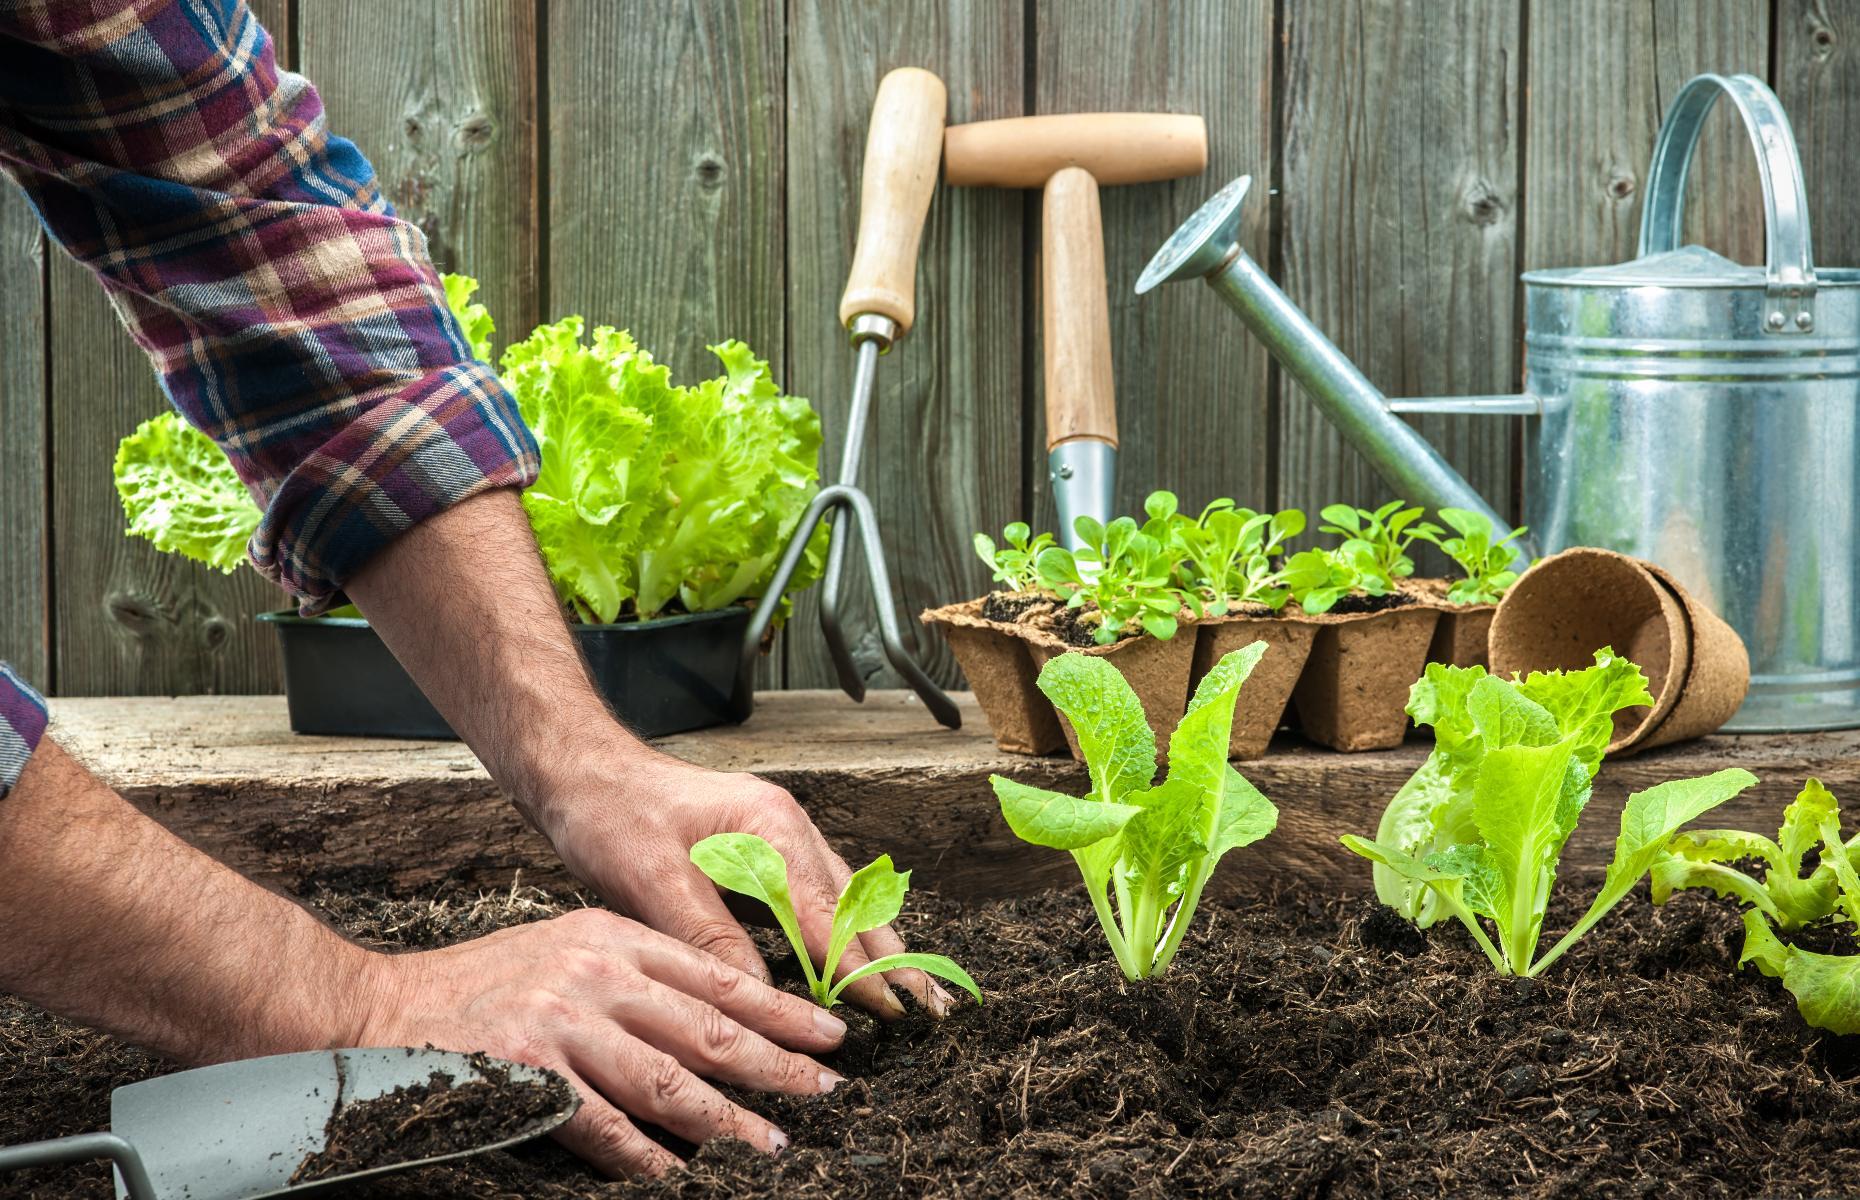 <p>If you want to give your new hobby a decent chance of success, it’s worth investing in the <a href="https://www.gardenersworld.com/product-guides/growing/essential-gardening-tools-list/">right tools</a>. Whether you’re tending a few patio pots or an entire walled vegetable garden, you’ll need a pair of gardening gloves to protect your hands. Secateurs or pruning shears are next, along with a hand trowel for weeding, planting and sowing seeds, and garden classic, a watering can. For bigger jobs, you’ll need a hoe, spade, fork, rake and hose.</p>